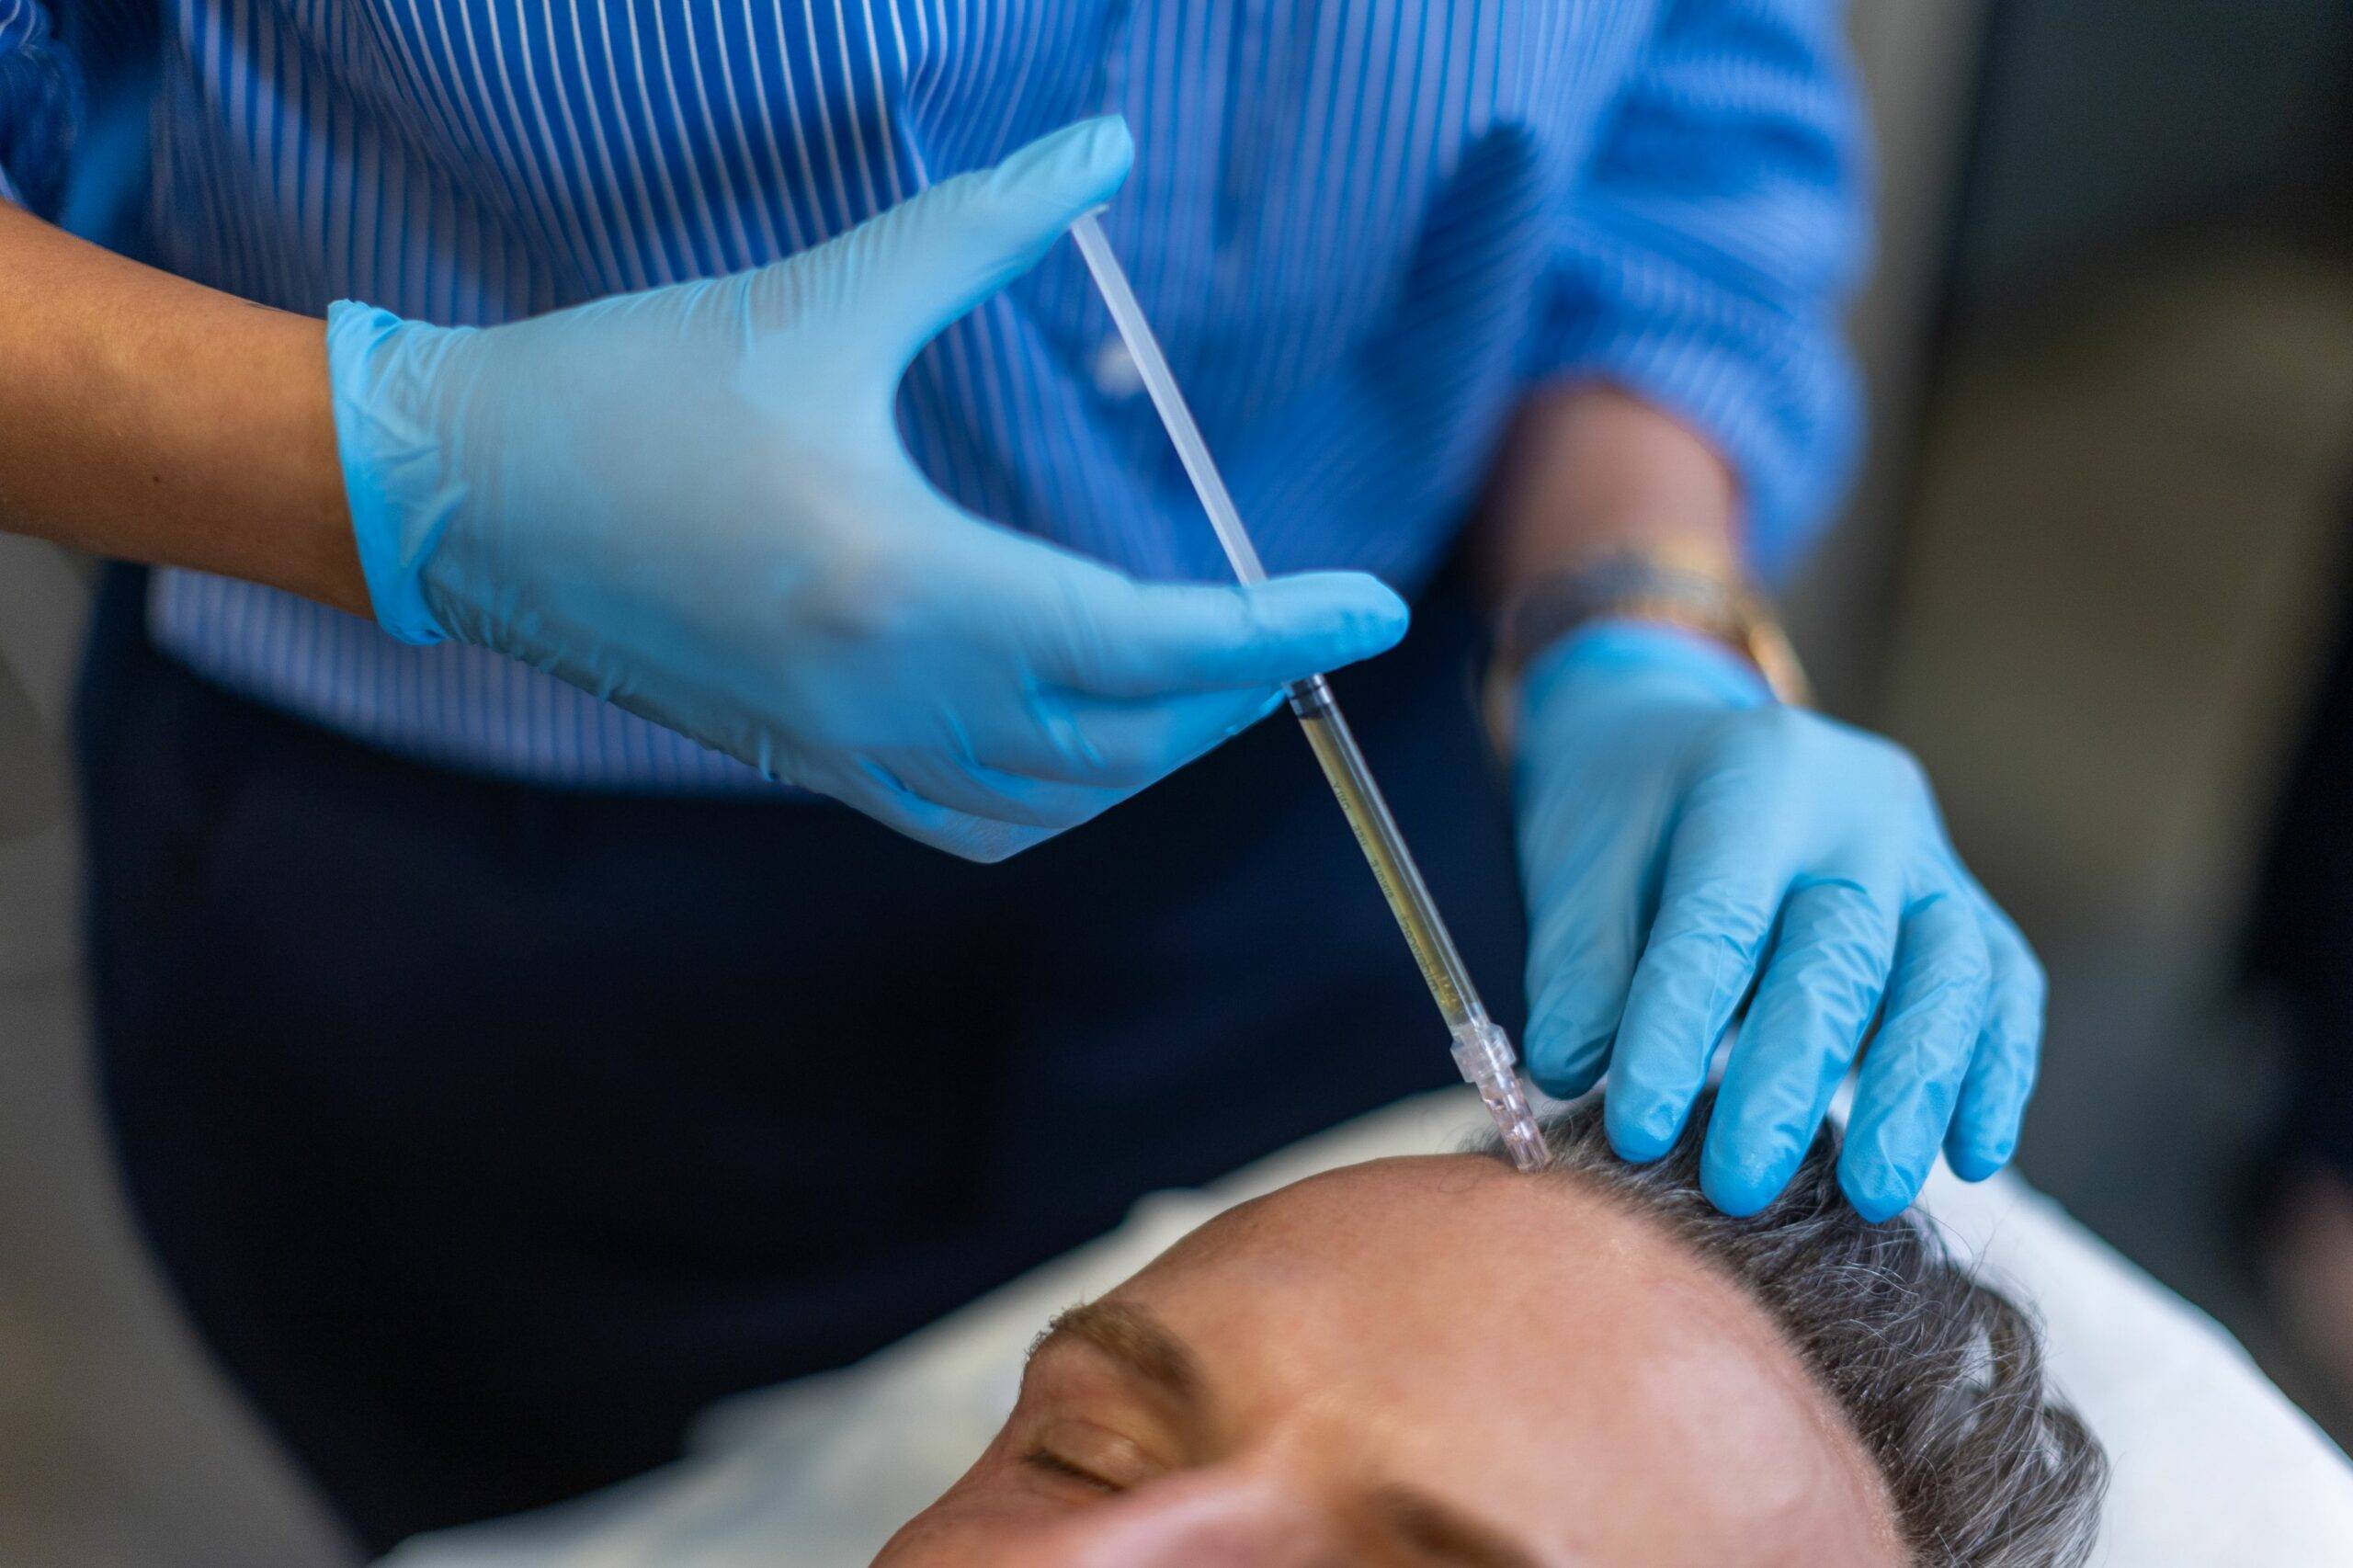 A healthcare professional in blue gloves administers a hair restoration injection to a patient's forehead, using a syringe. The patient is lying down and has their eyes closed.